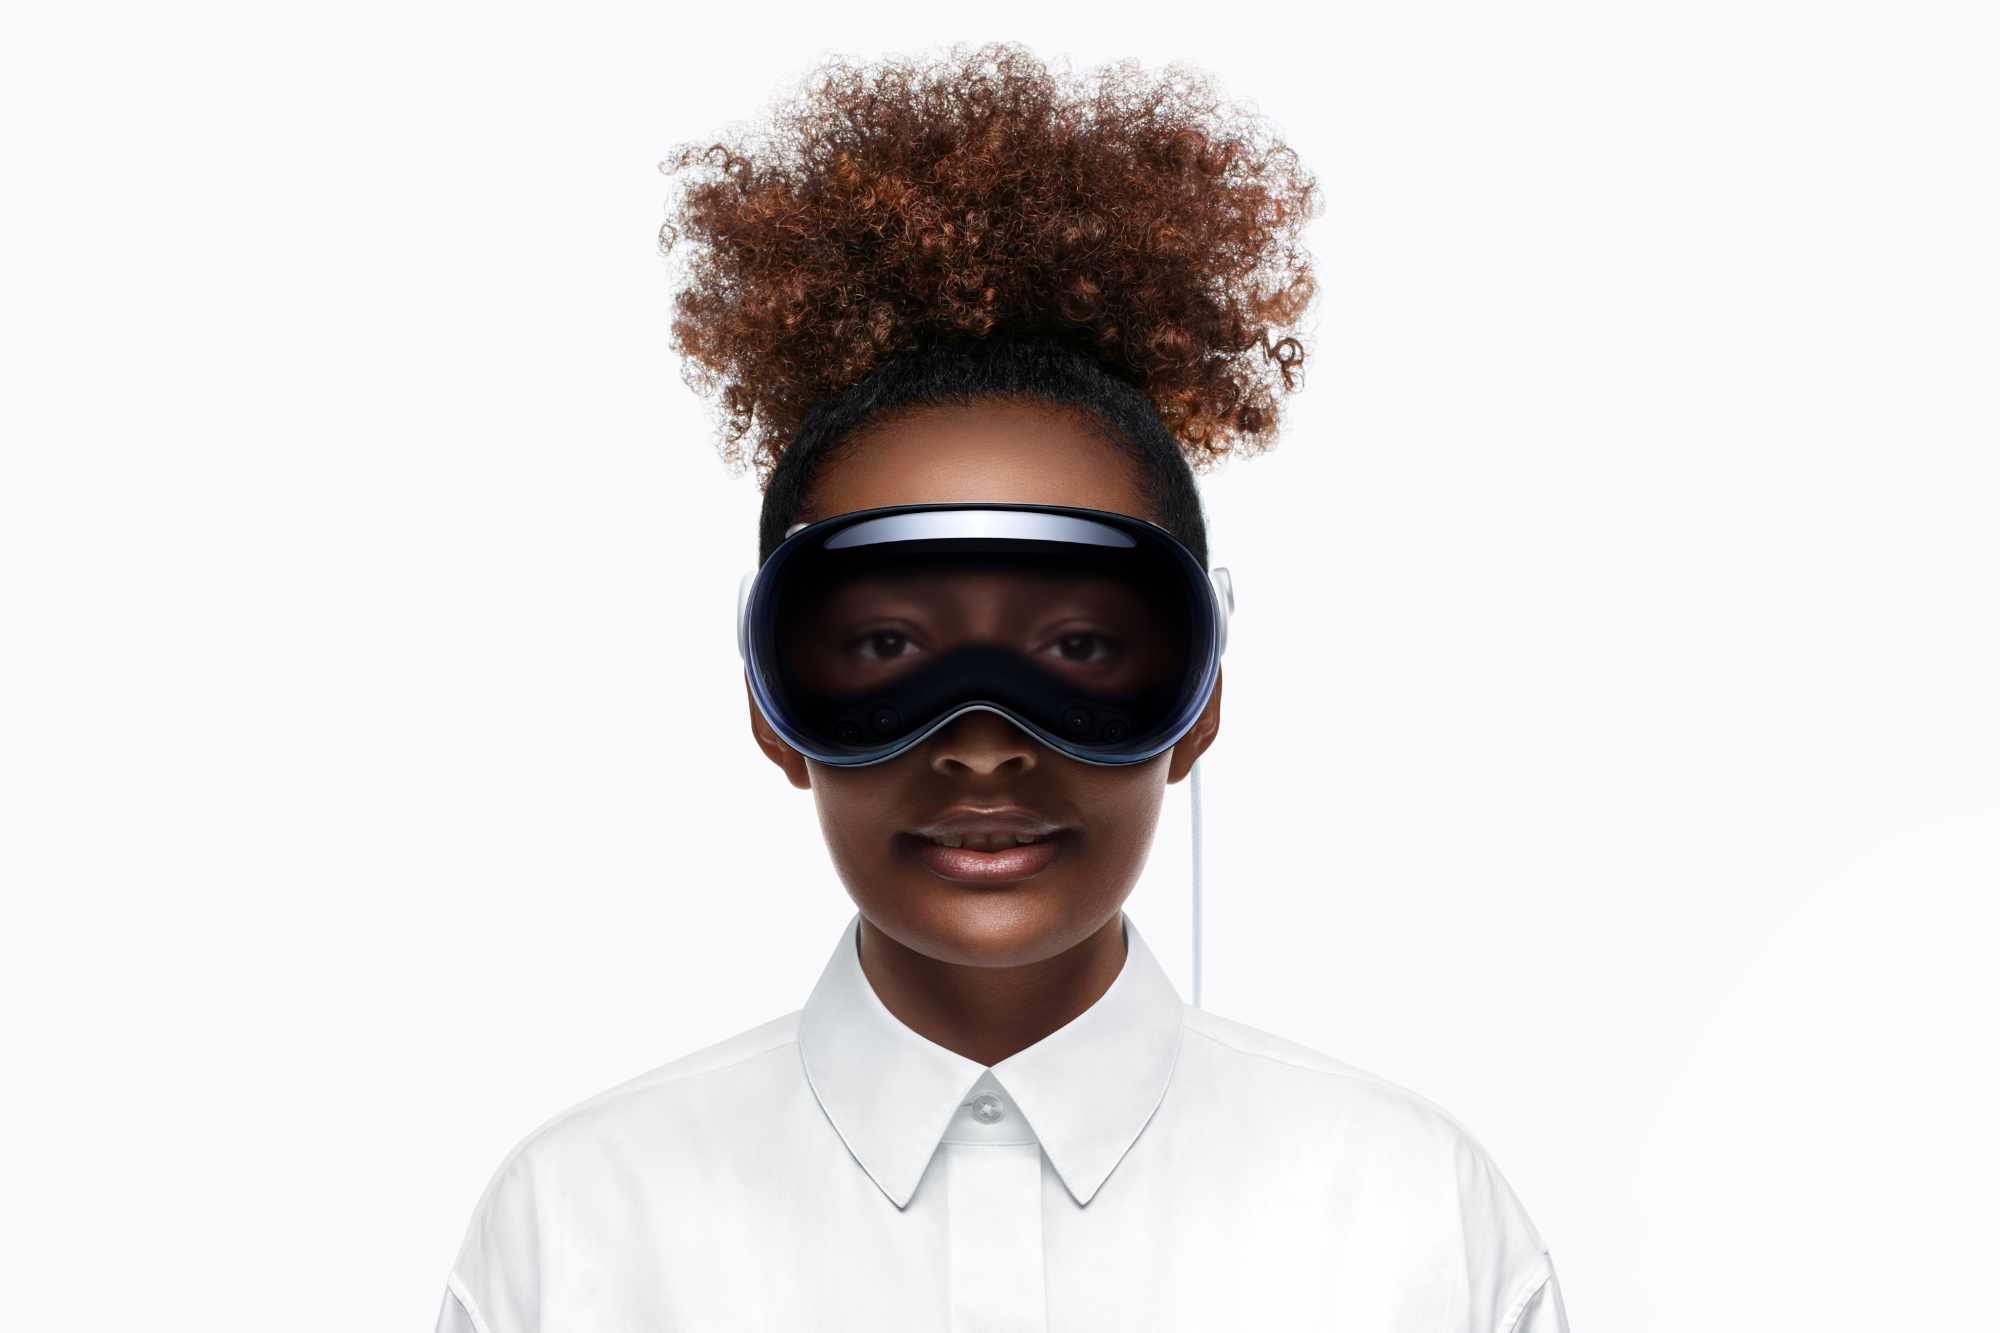 Apple's Vision Pro VR headset worn by a model